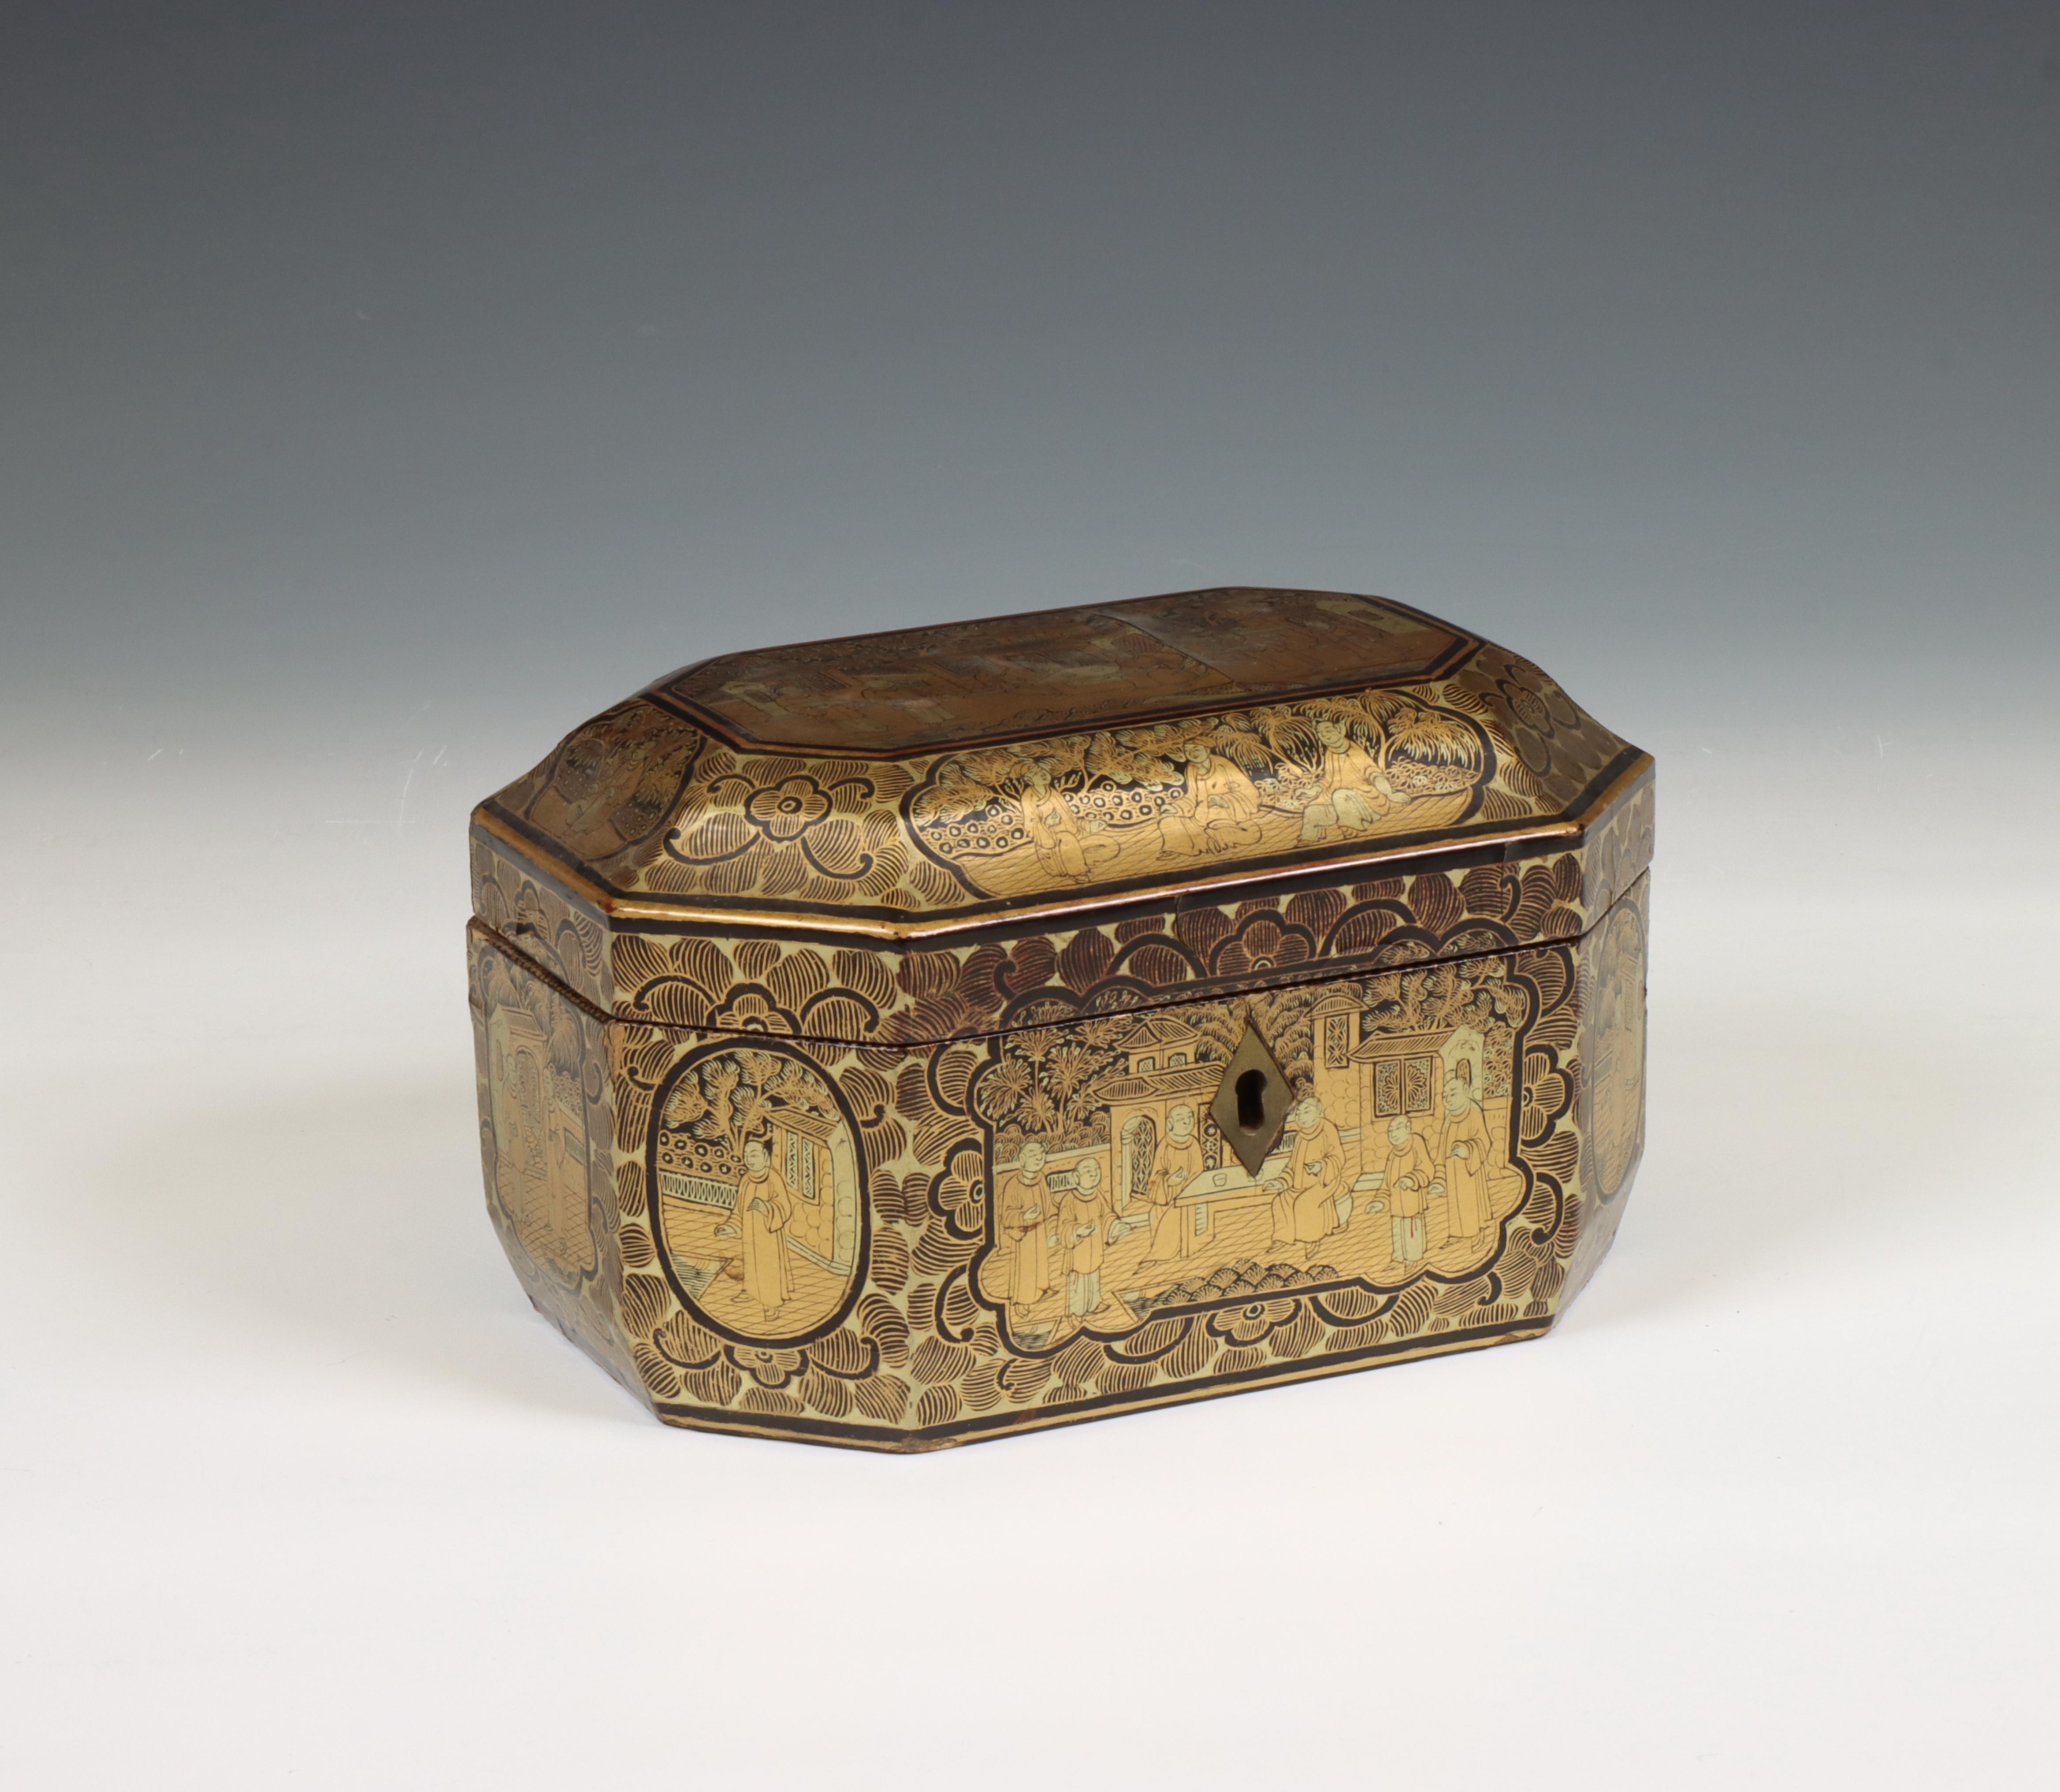 China, an export pewter tea-caddy in lacquer box, 19th century,